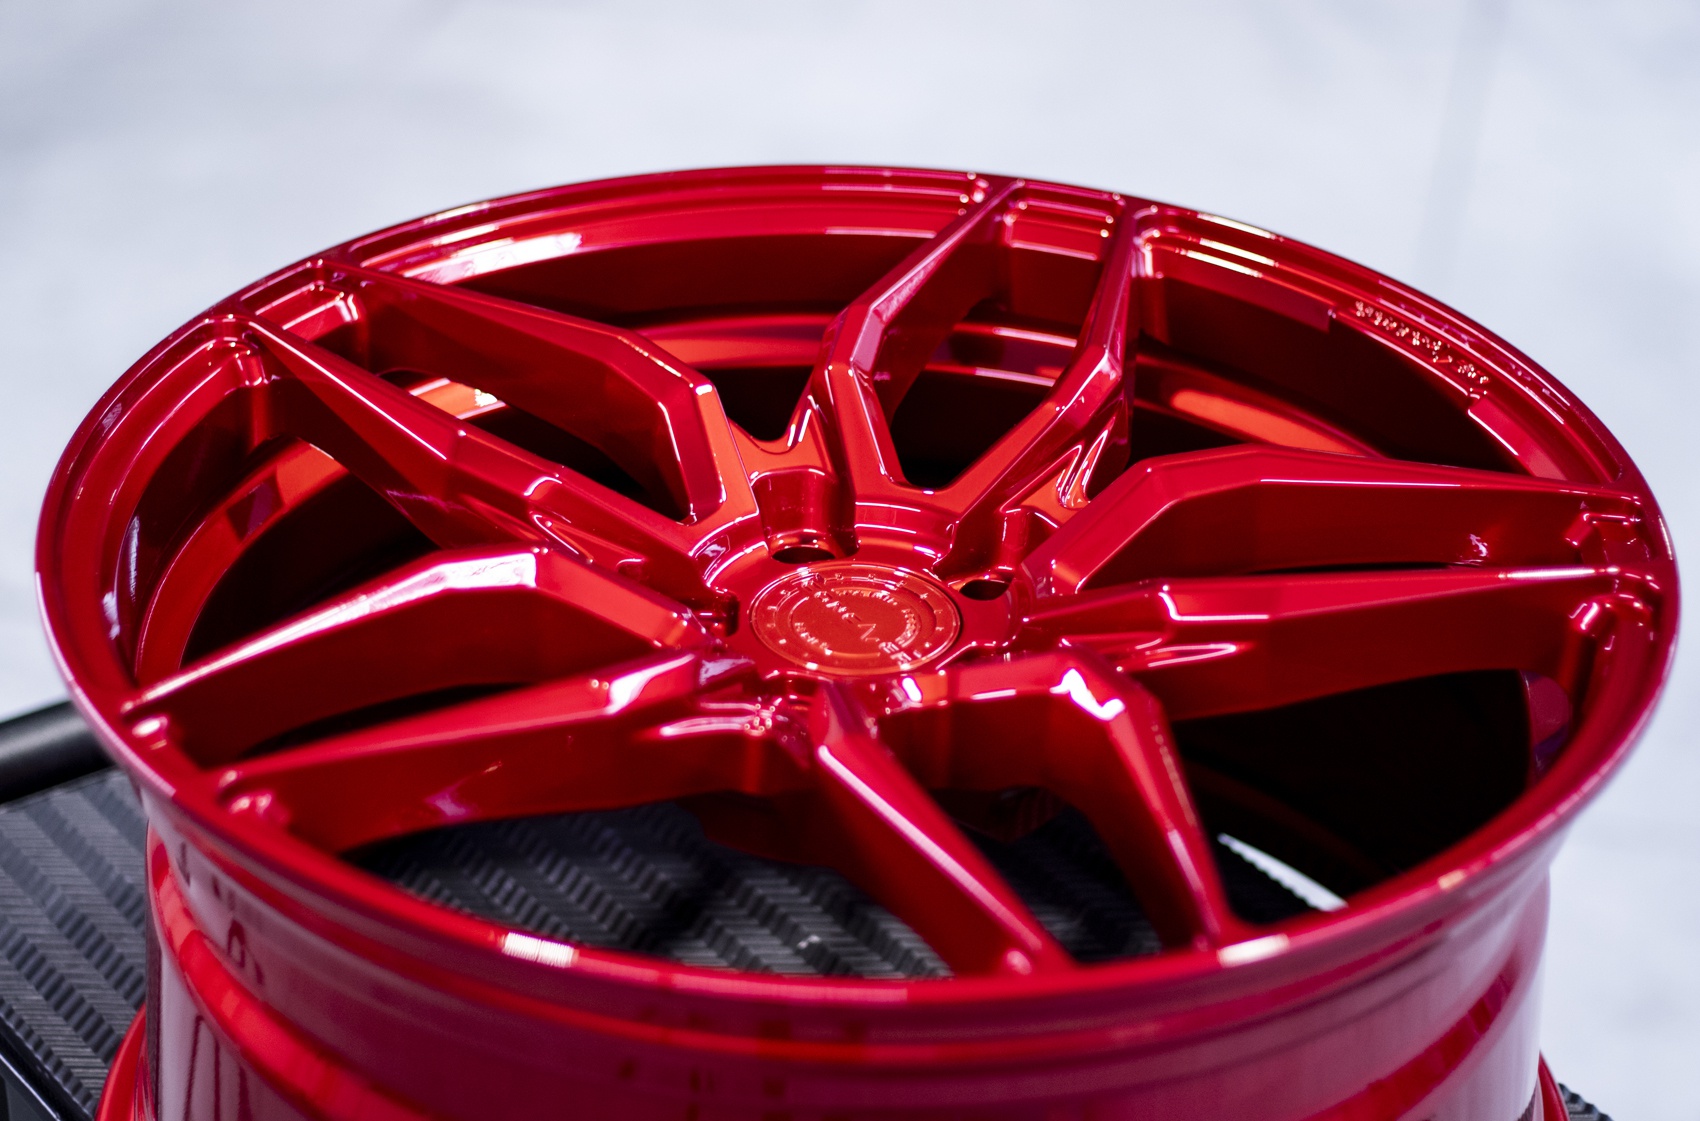   Concaver CVR3 Gloss Candy Apple Red